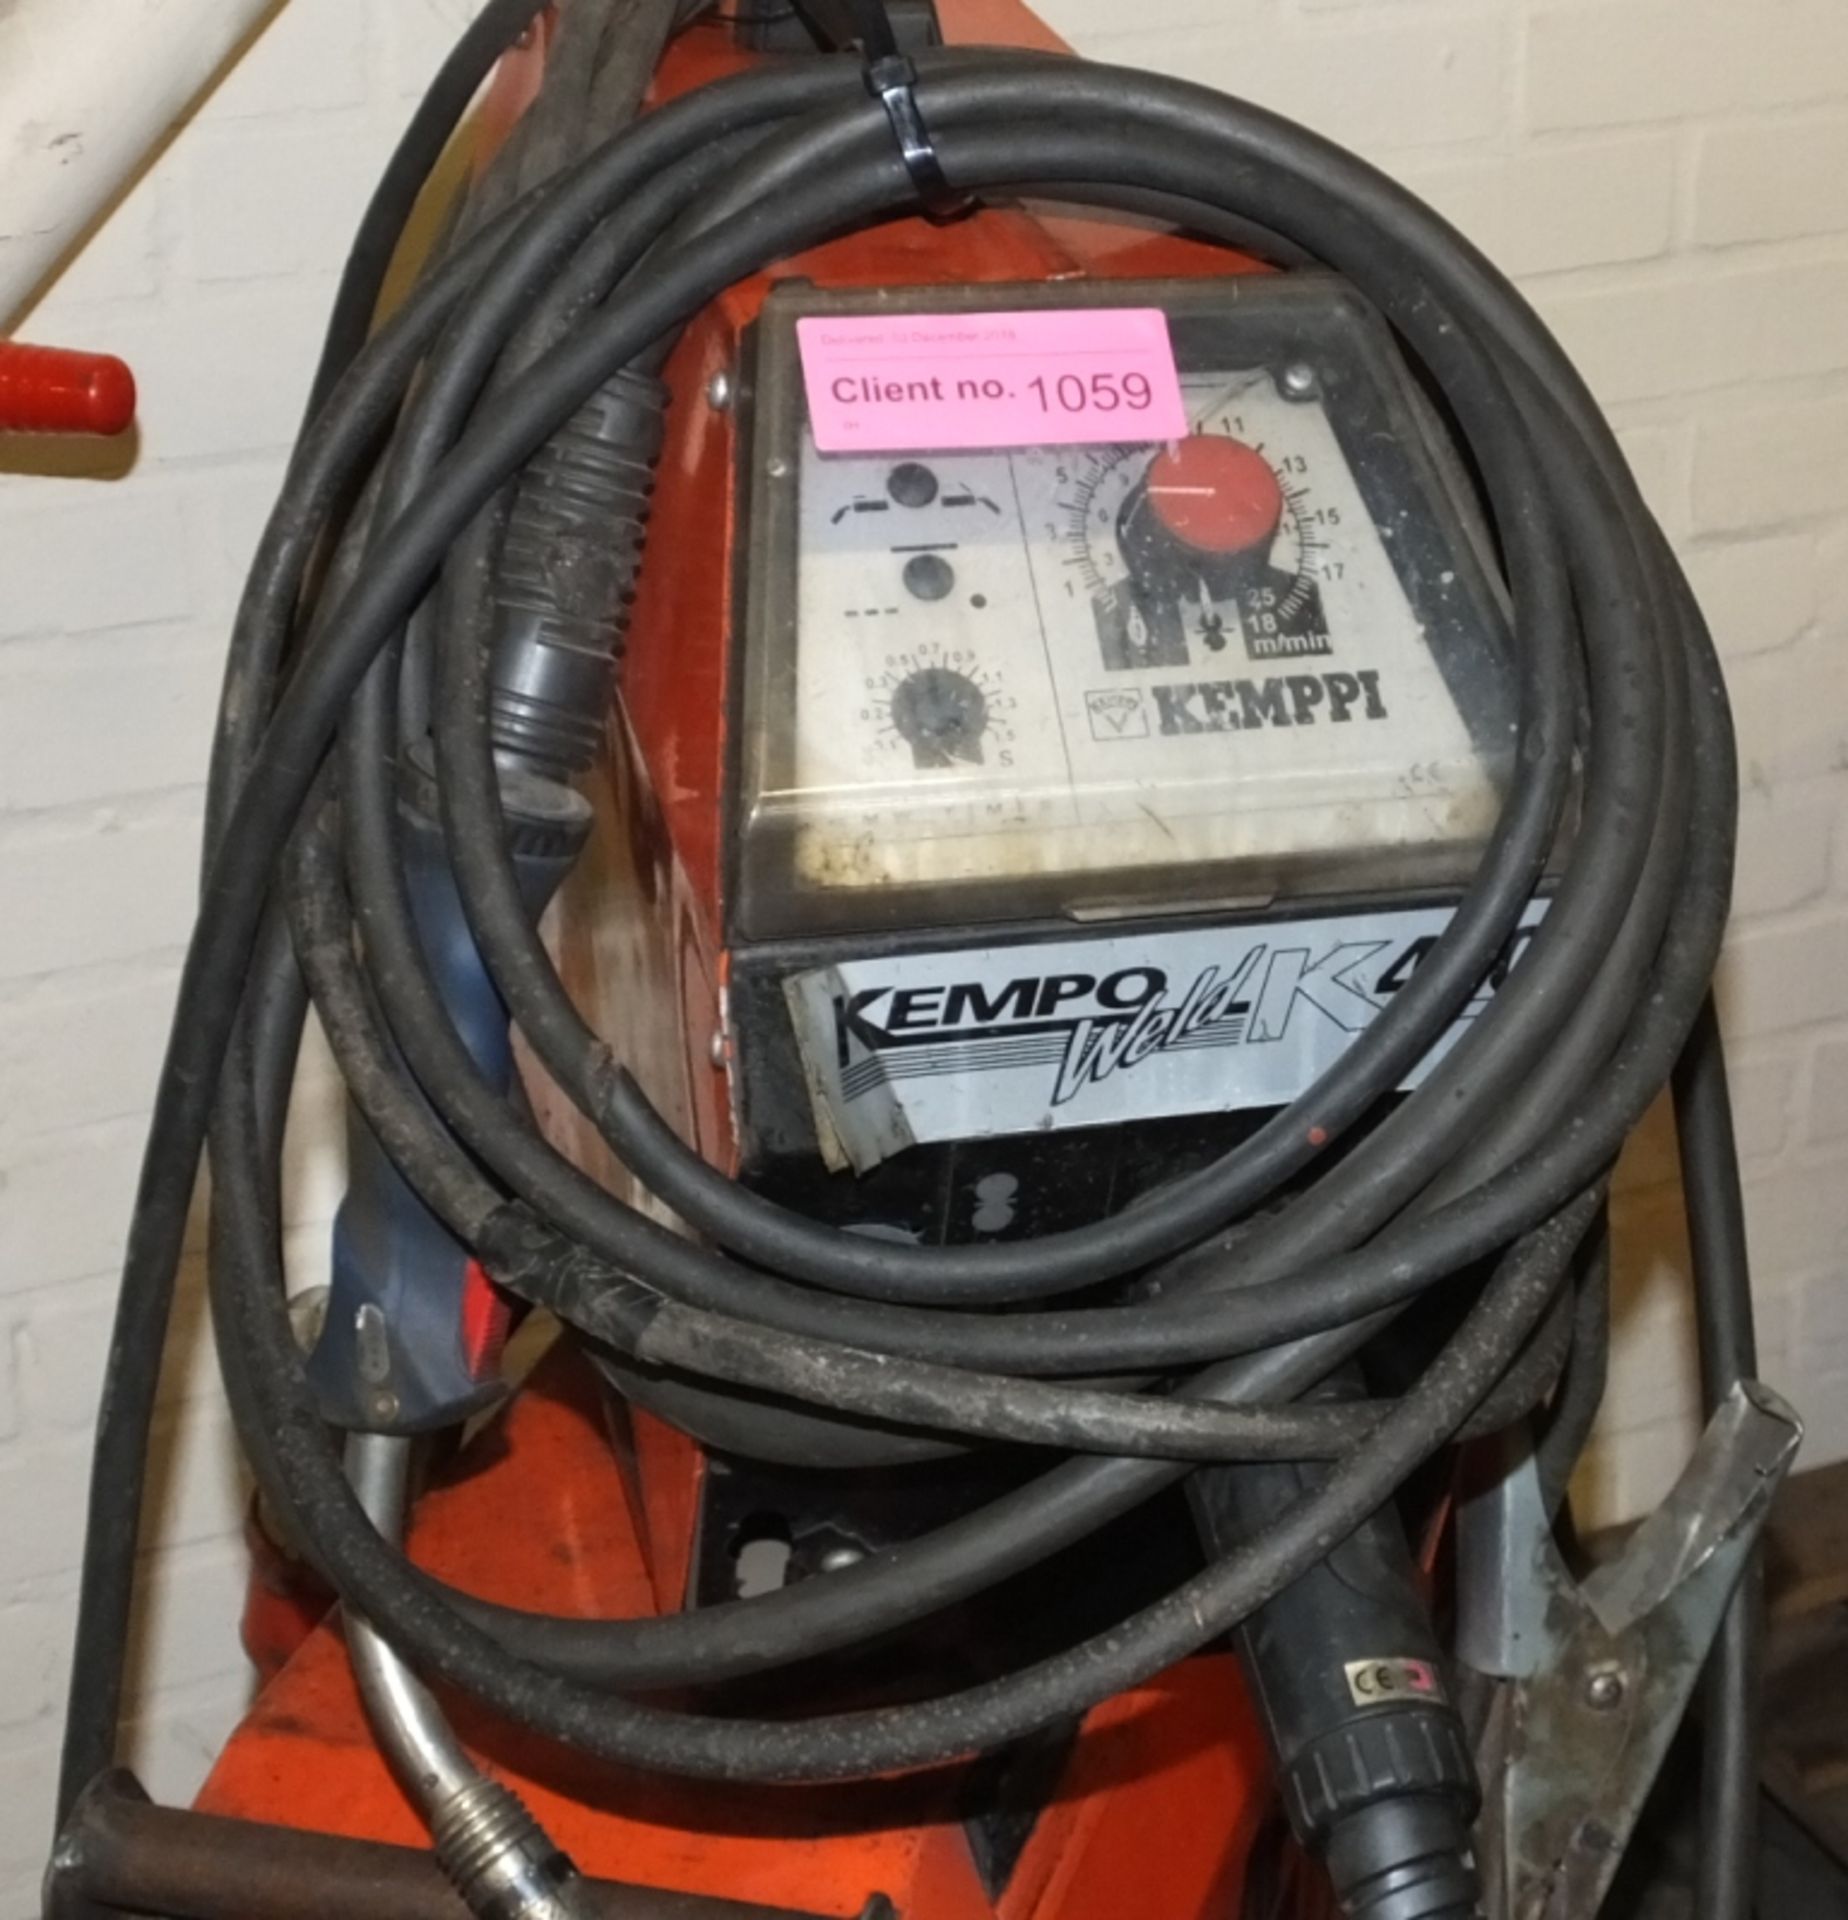 Kemppi Kempo welder 4000 with Kempo Weld 400 head unit - Image 3 of 4